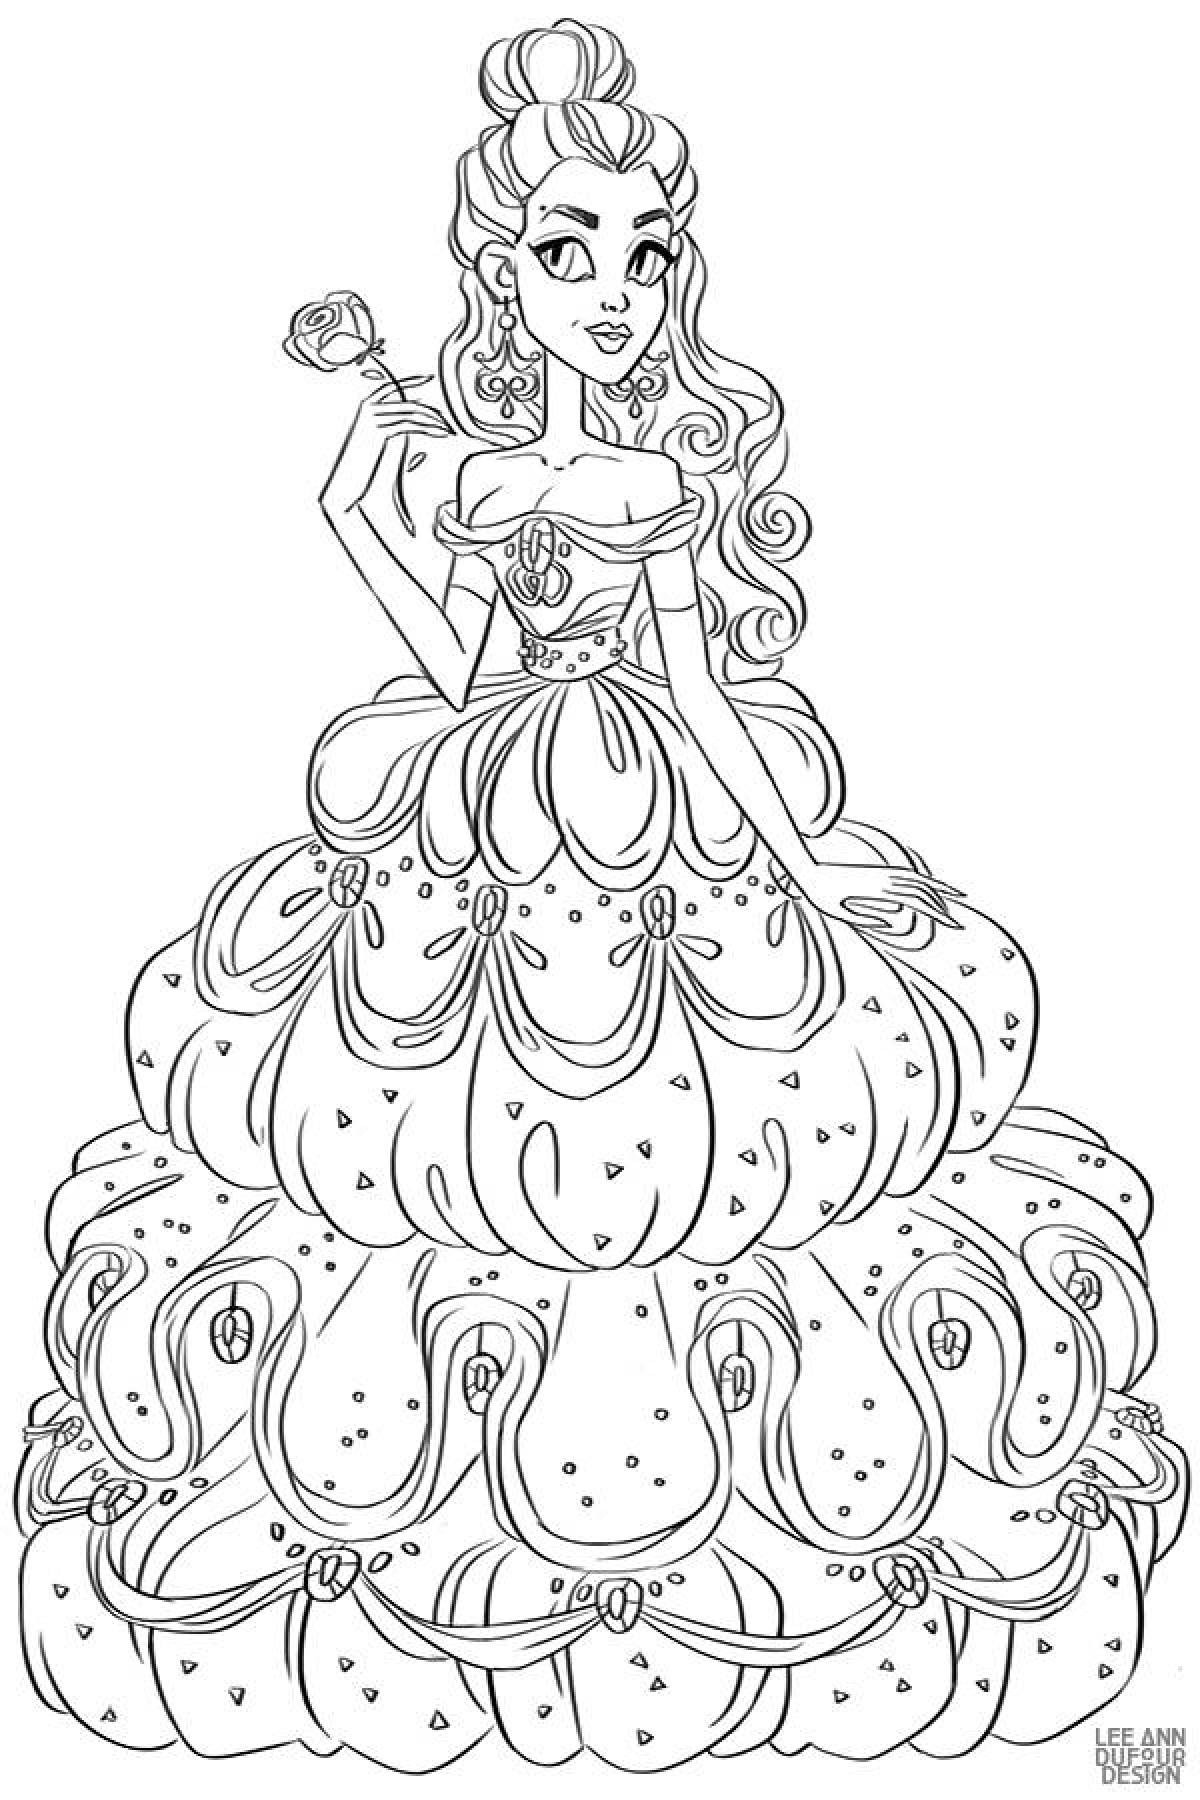 Dazzling coloring pages of princesses in beautiful dresses